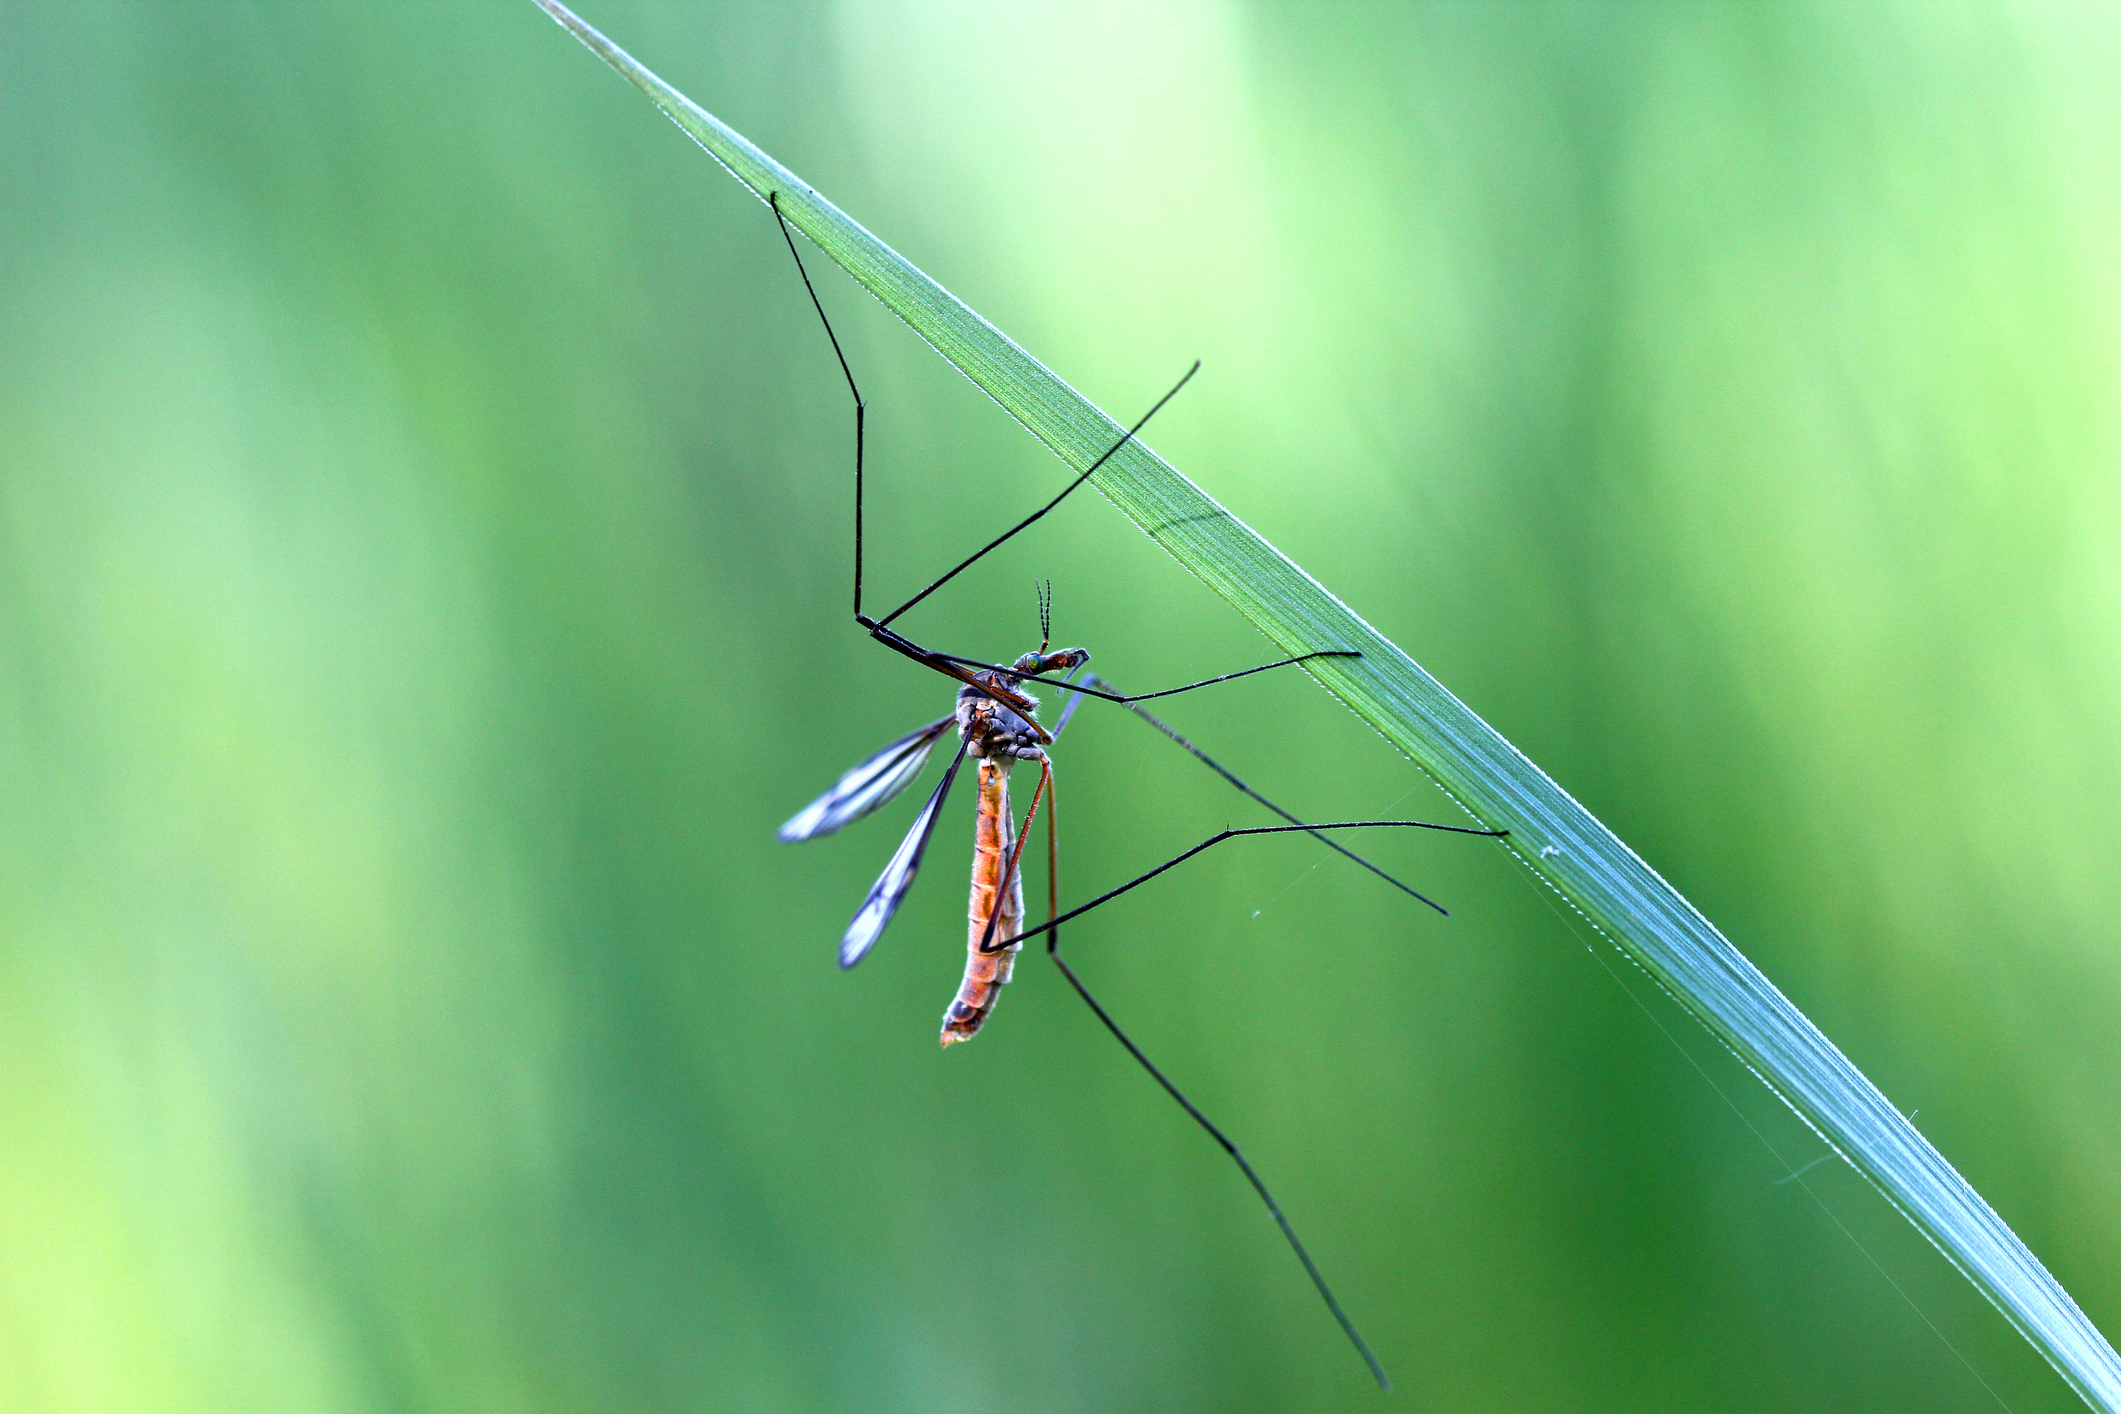 A mosquito sitting upside down on a long thin leaf.